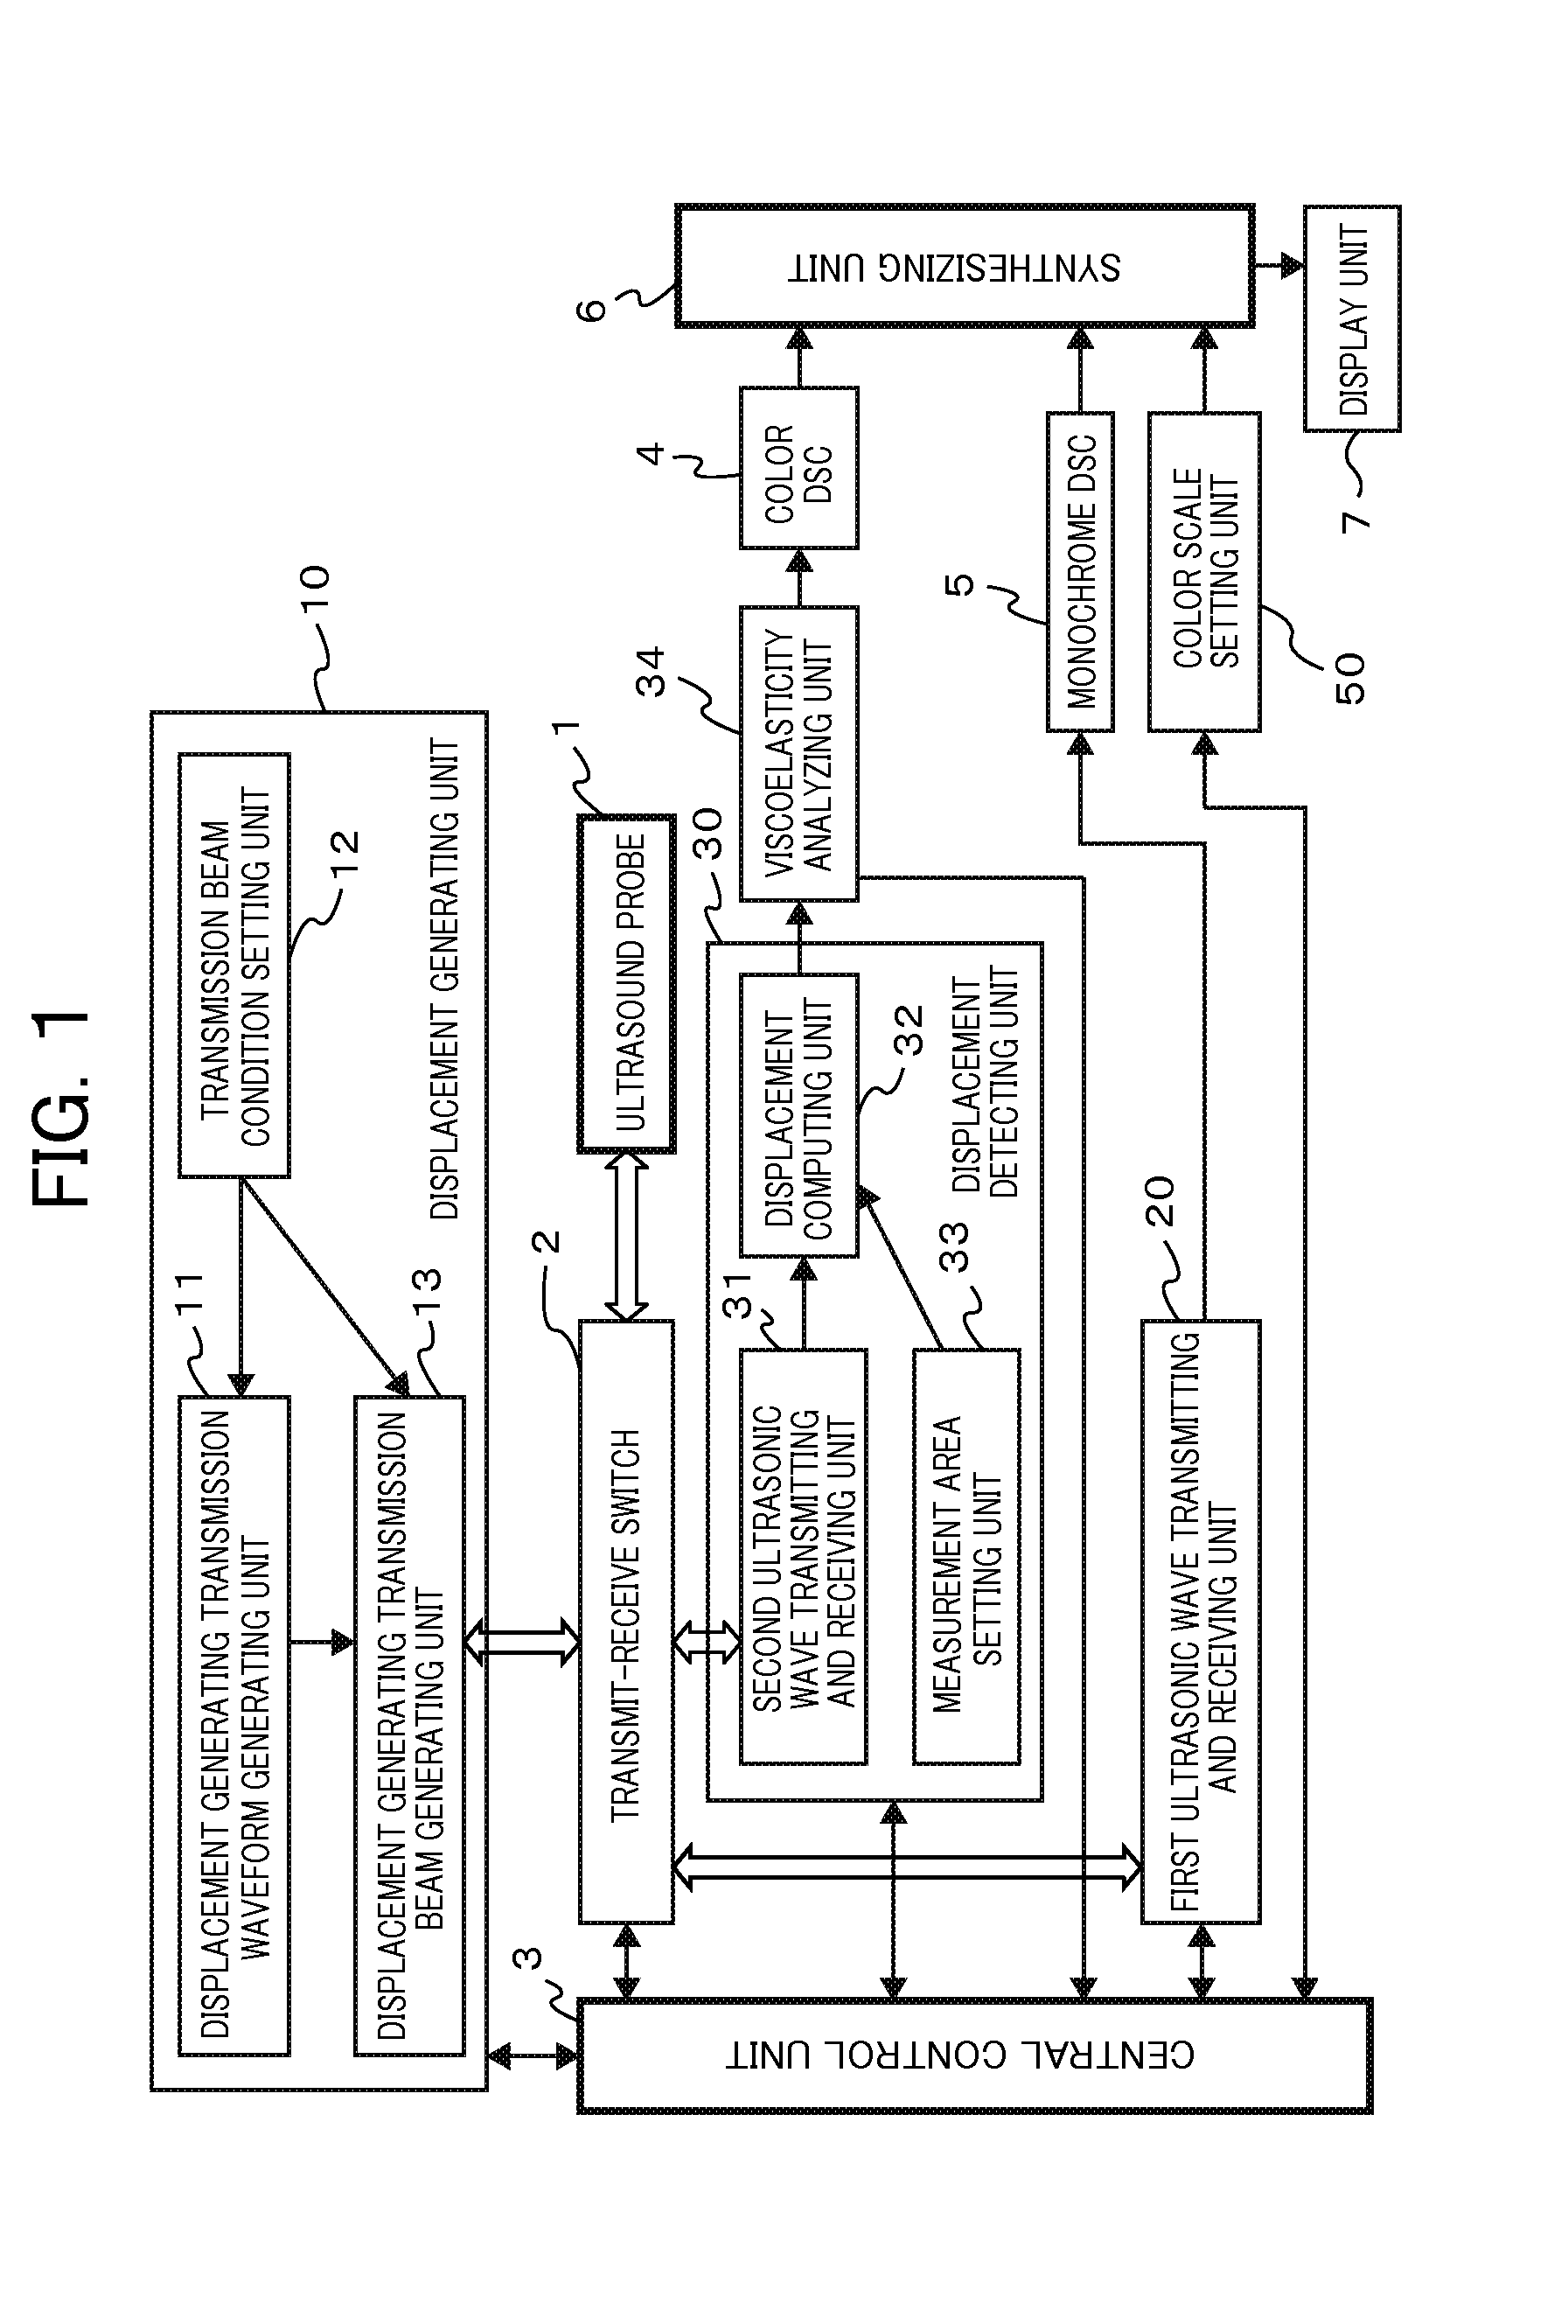 Apparatus and method for ultrasonic diagnosis